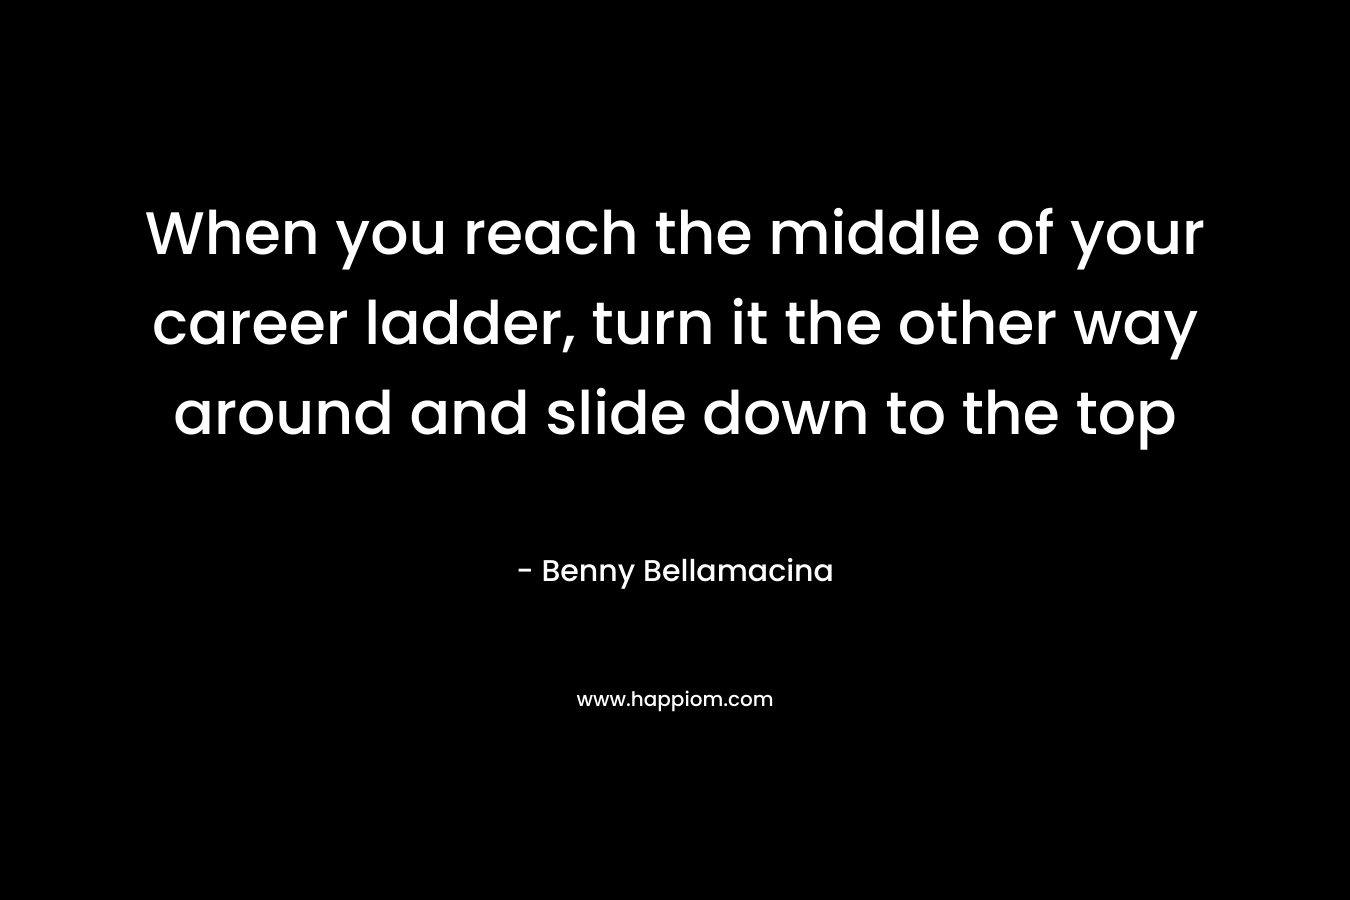 When you reach the middle of your career ladder, turn it the other way around and slide down to the top – Benny Bellamacina